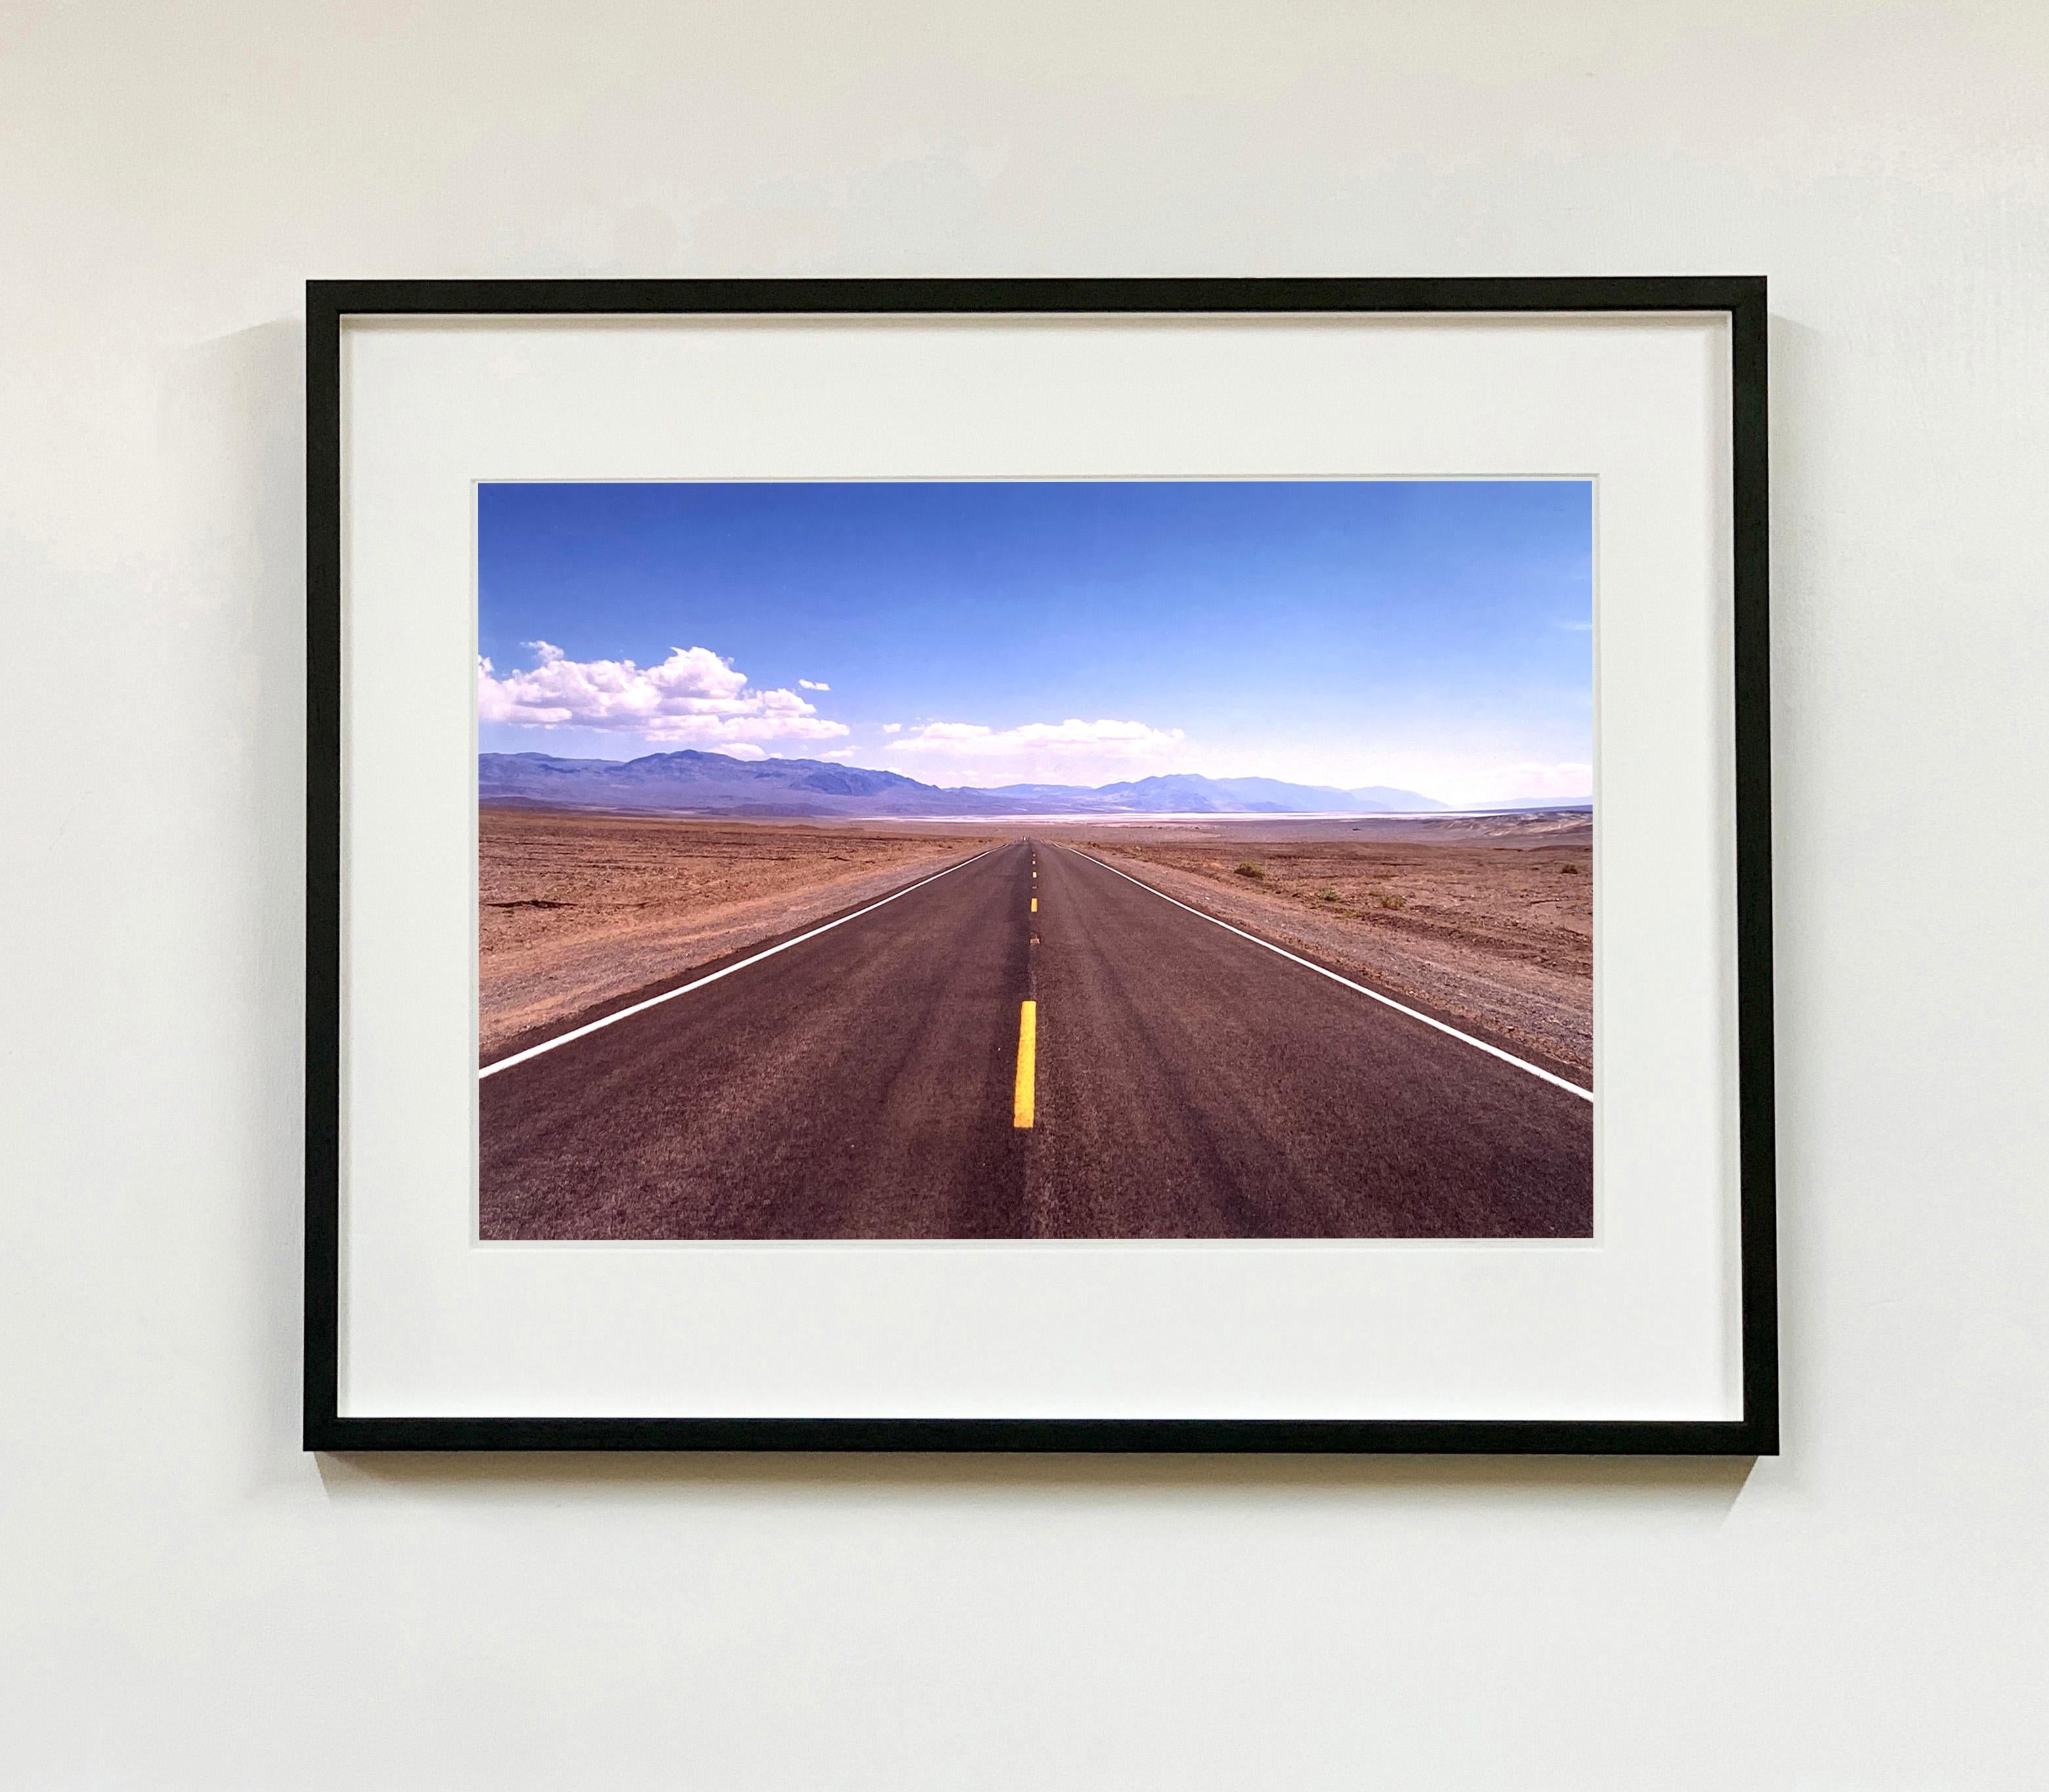 The Road to Death Valley, Mojave Desert, California - Landscape Color Photo - Print by Richard Heeps